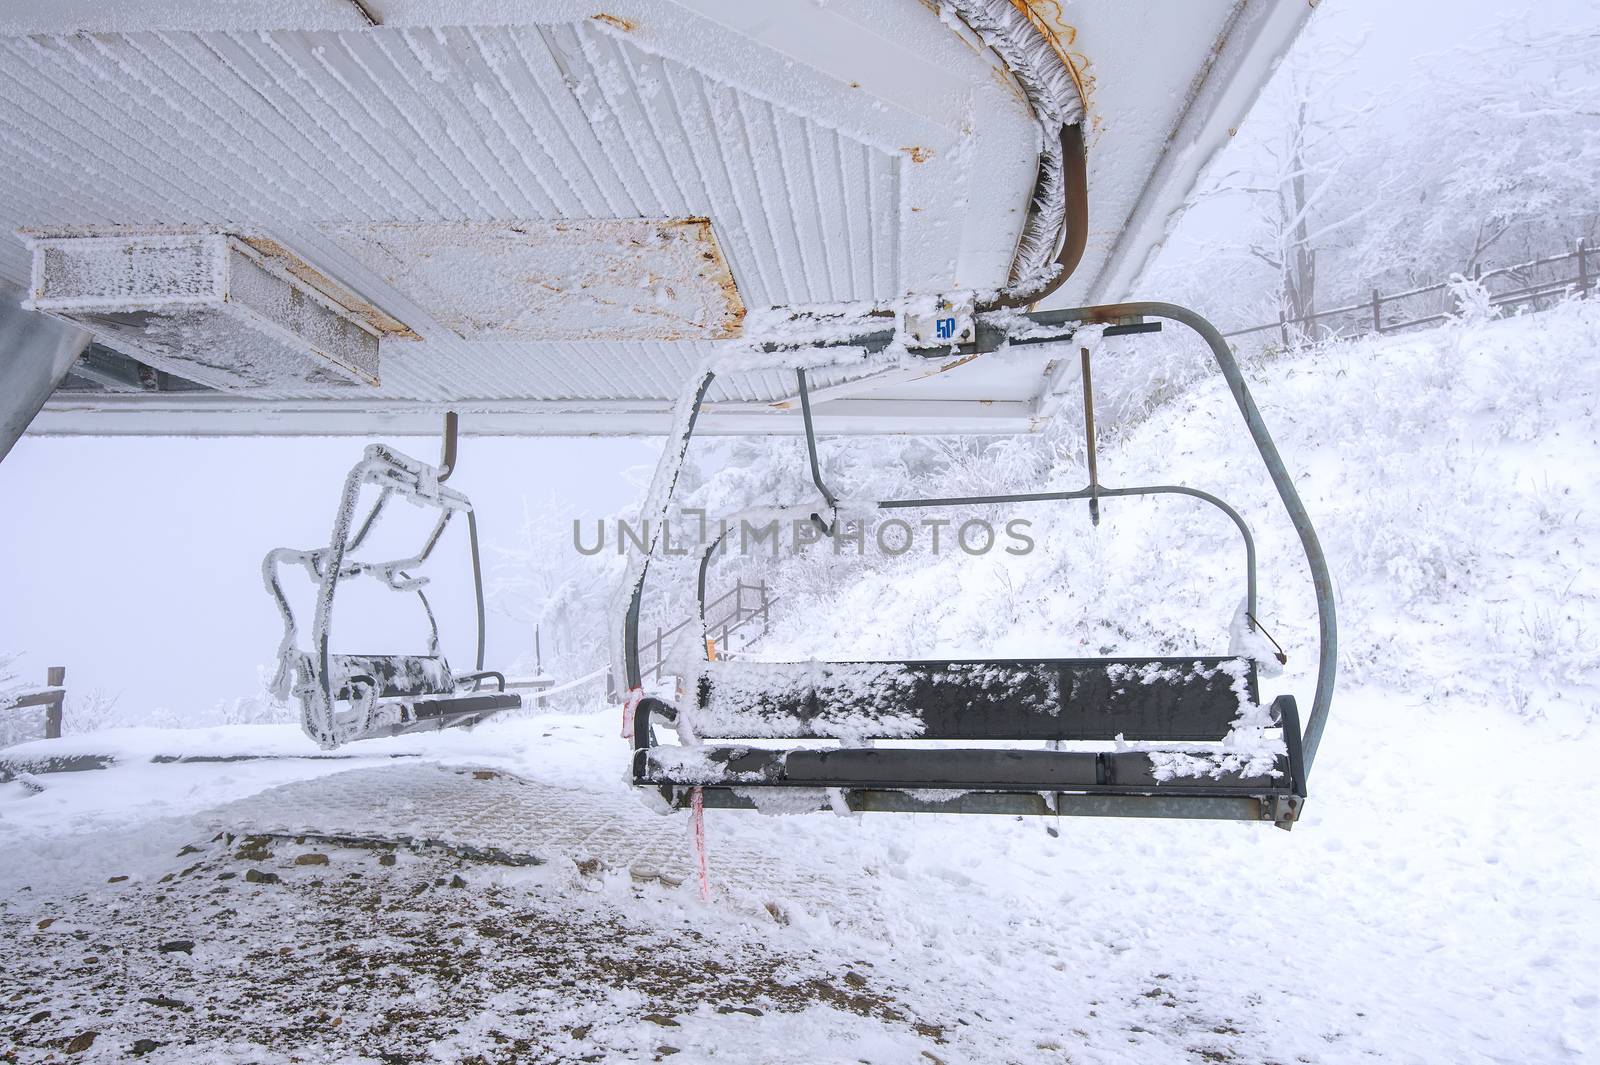 Ski chair lift is covered by snow in winter, Korea. by gutarphotoghaphy